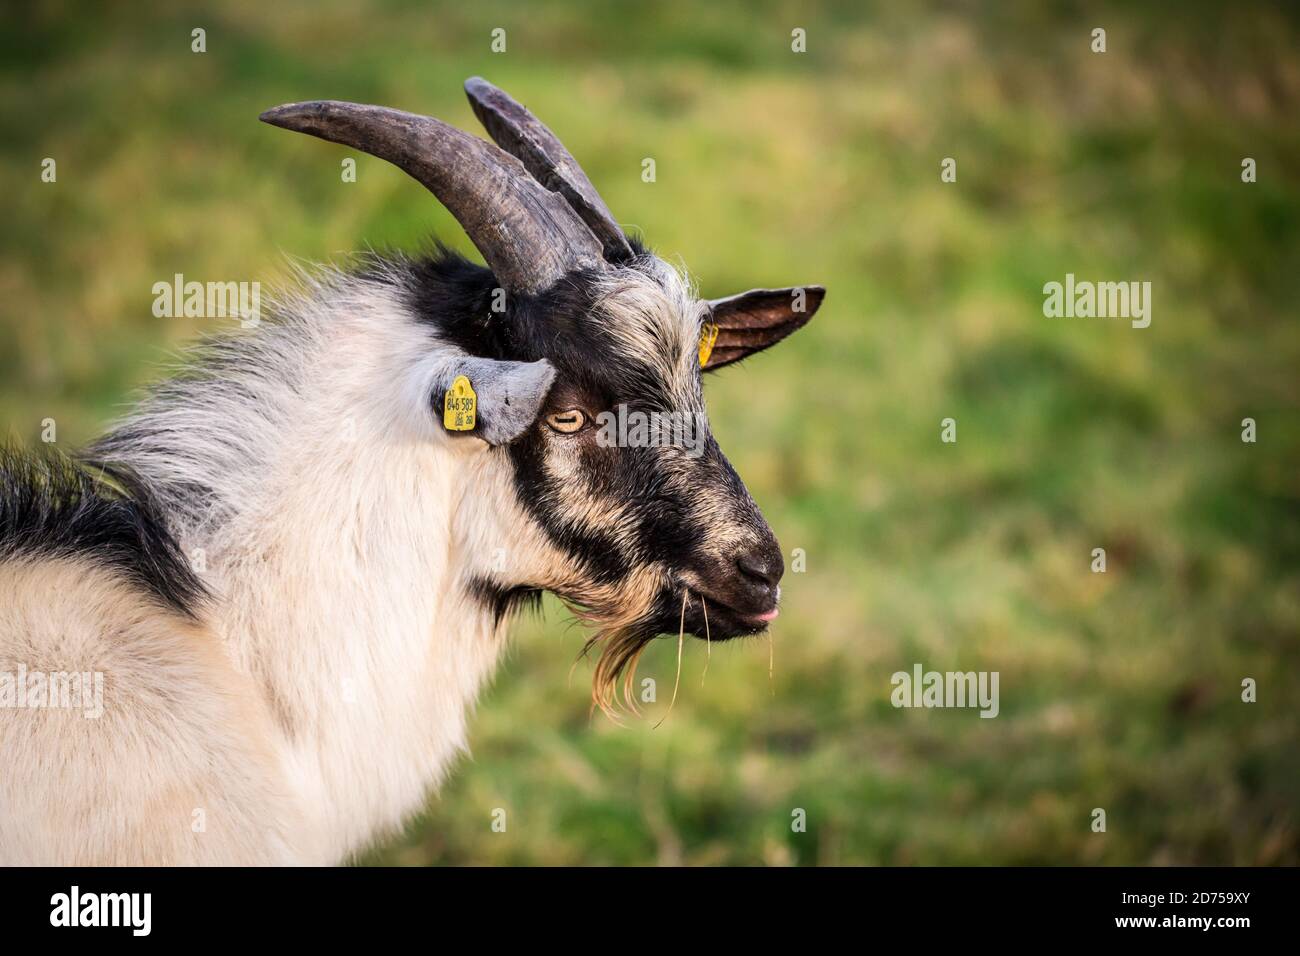 Peacock goat ramgoat (billy goat), an endangered goat breed from Austria (Pfauenziege) Stock Photo